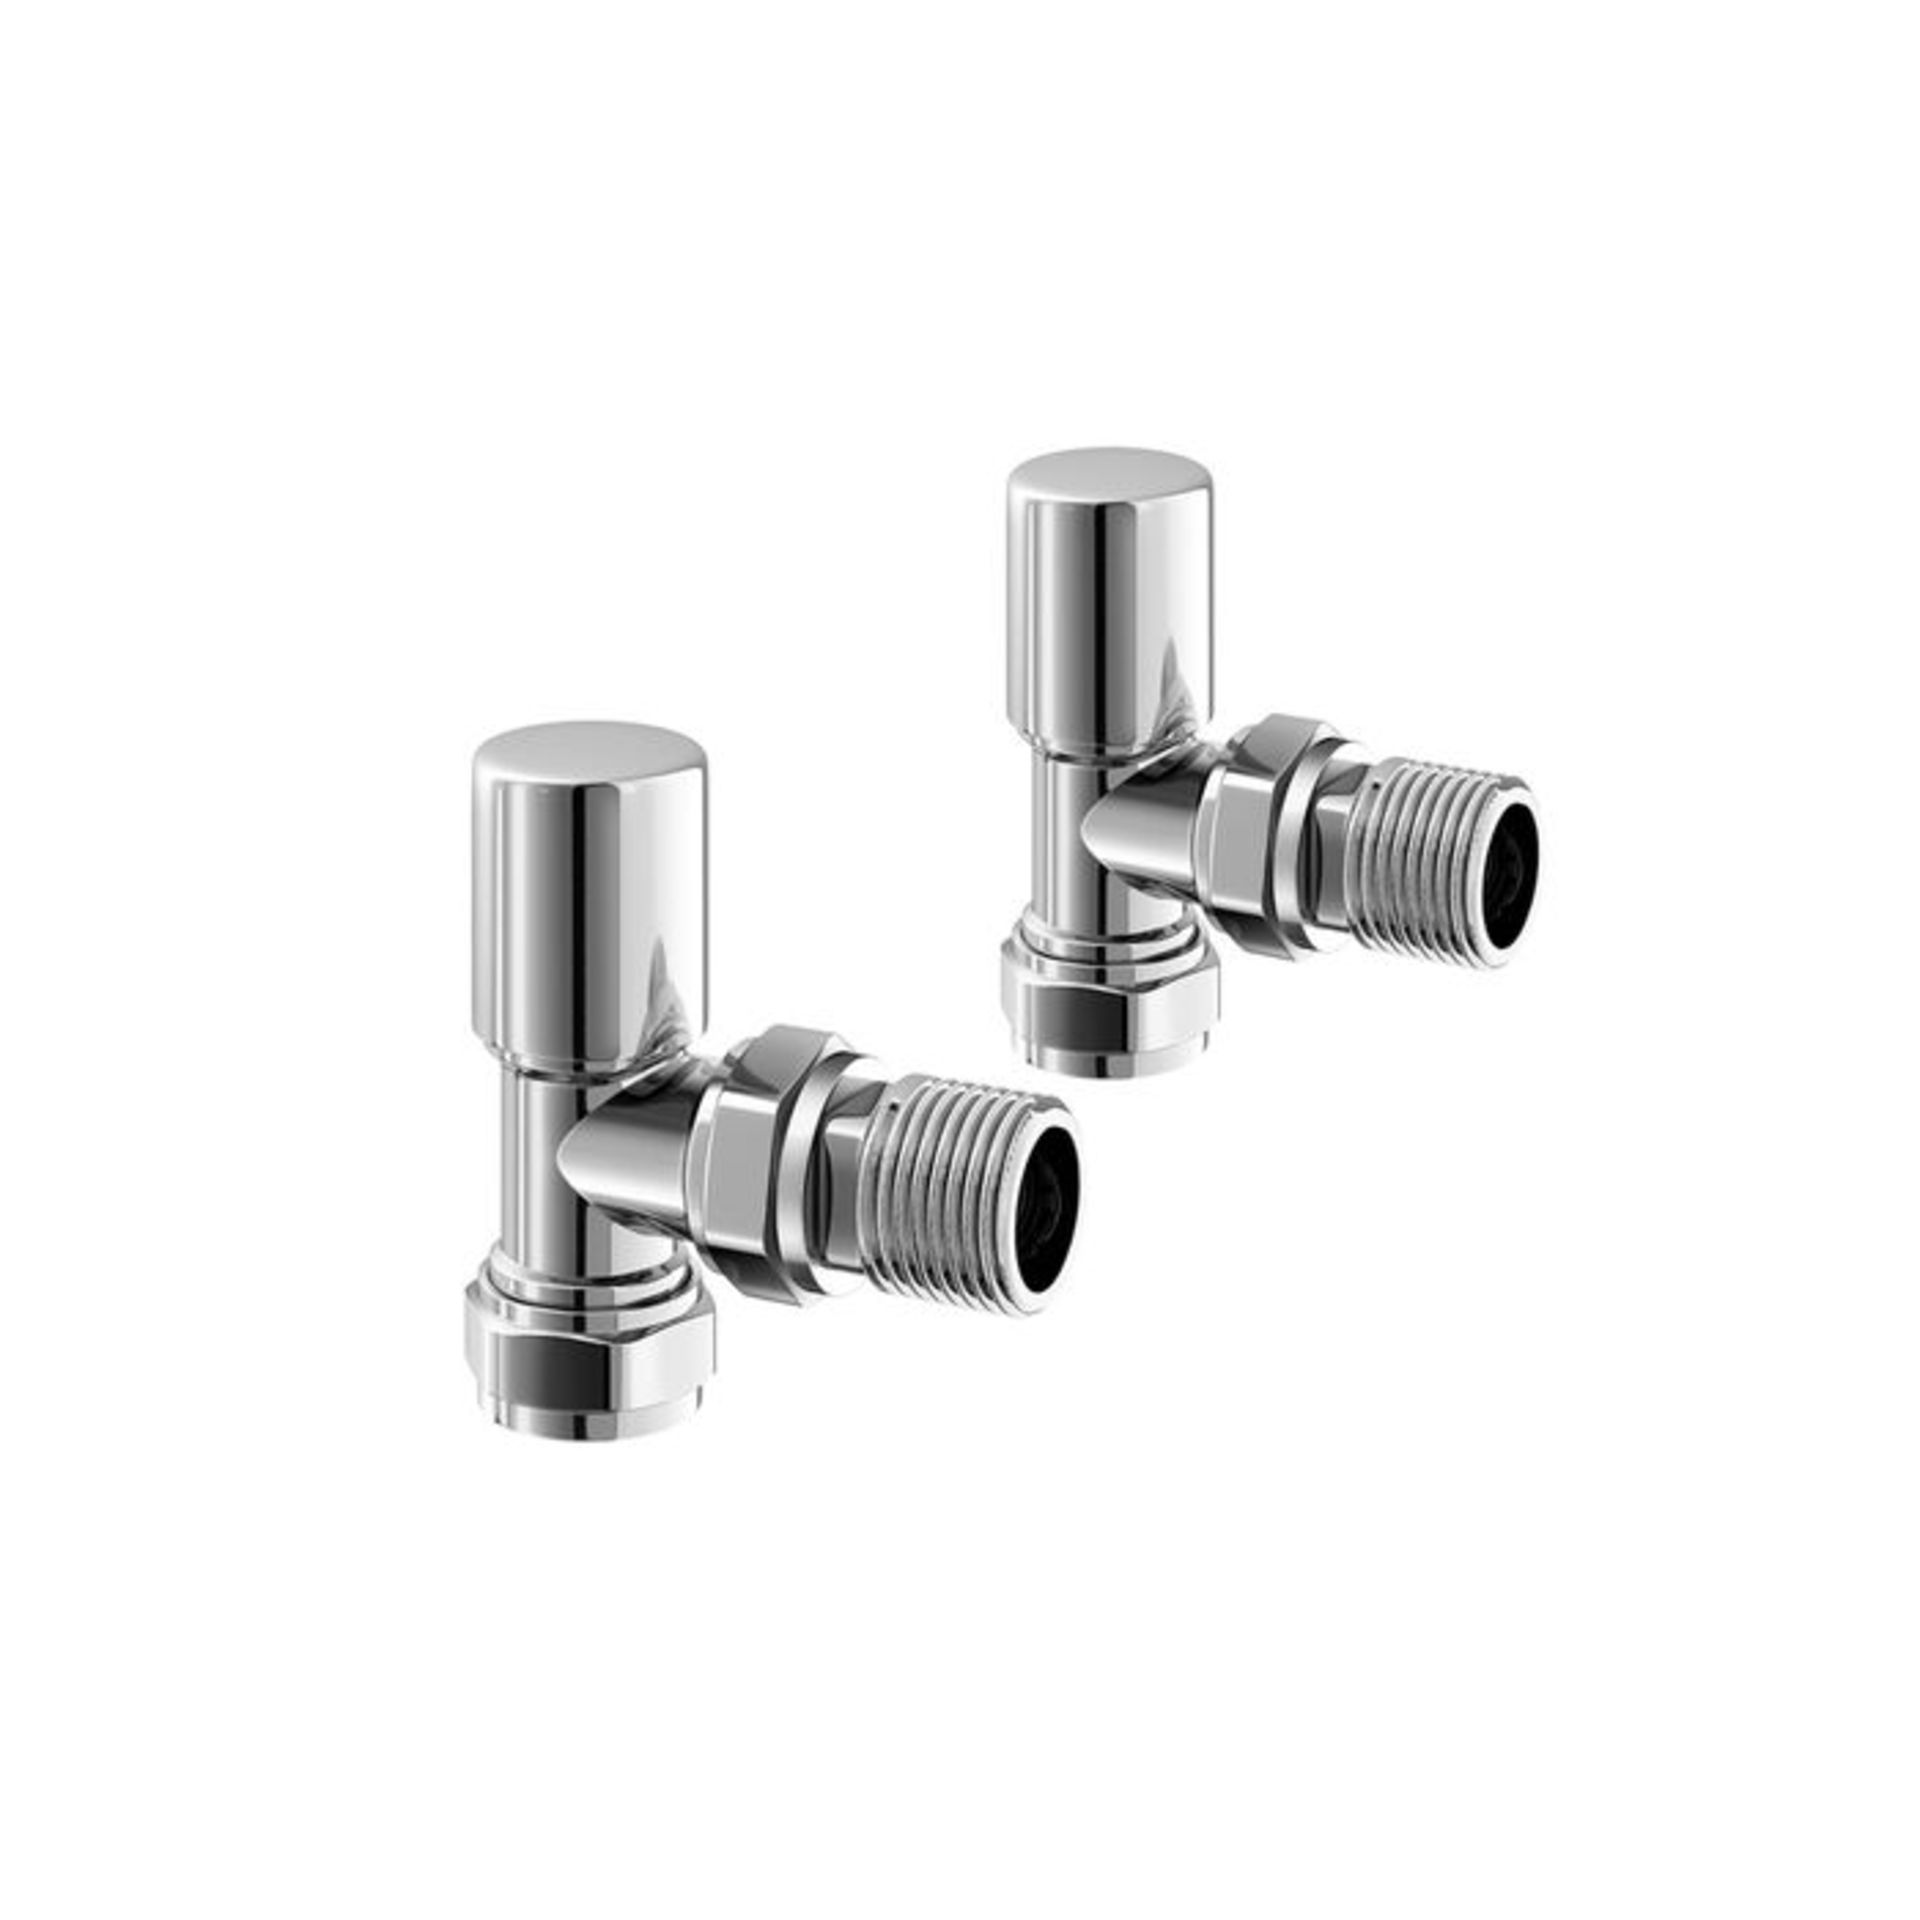 NEW (NV1015) Standard 15mm Connection Angled Chrome Radiator Valves Chrome Plated Solid Brass A... - Image 2 of 2